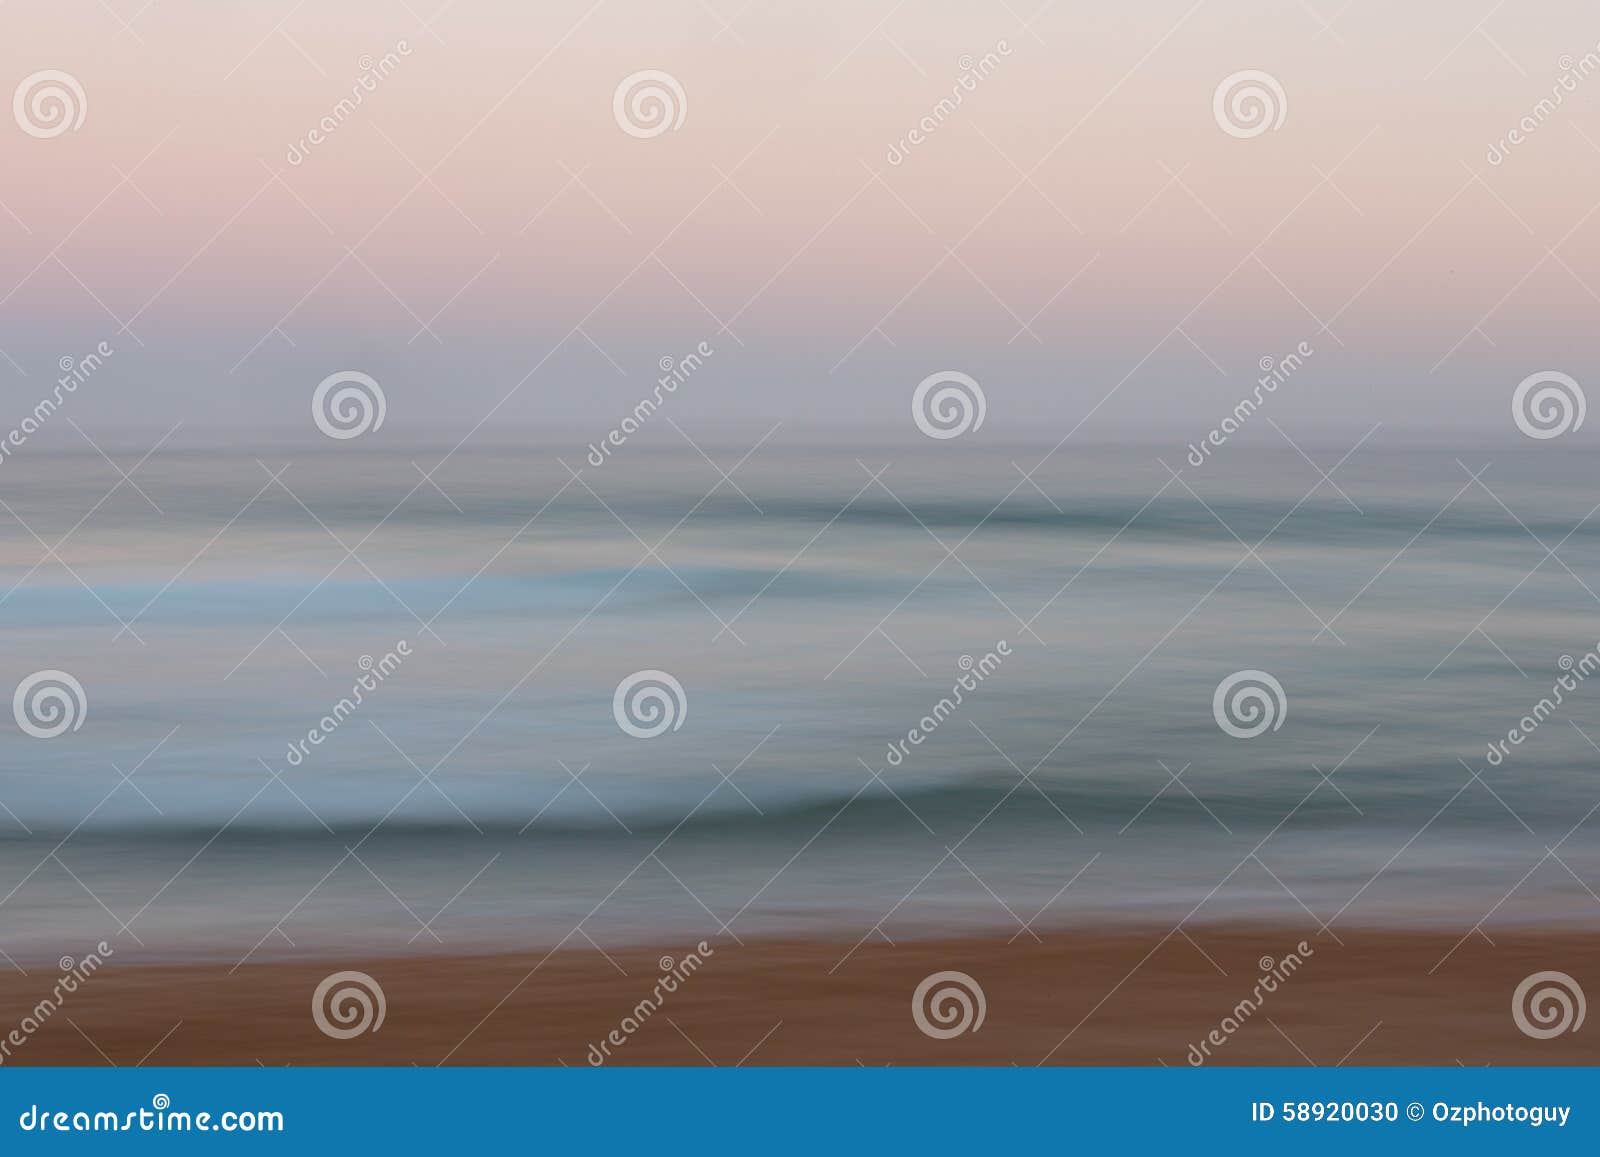 abstract sunrise ocean background with blurred panning motion